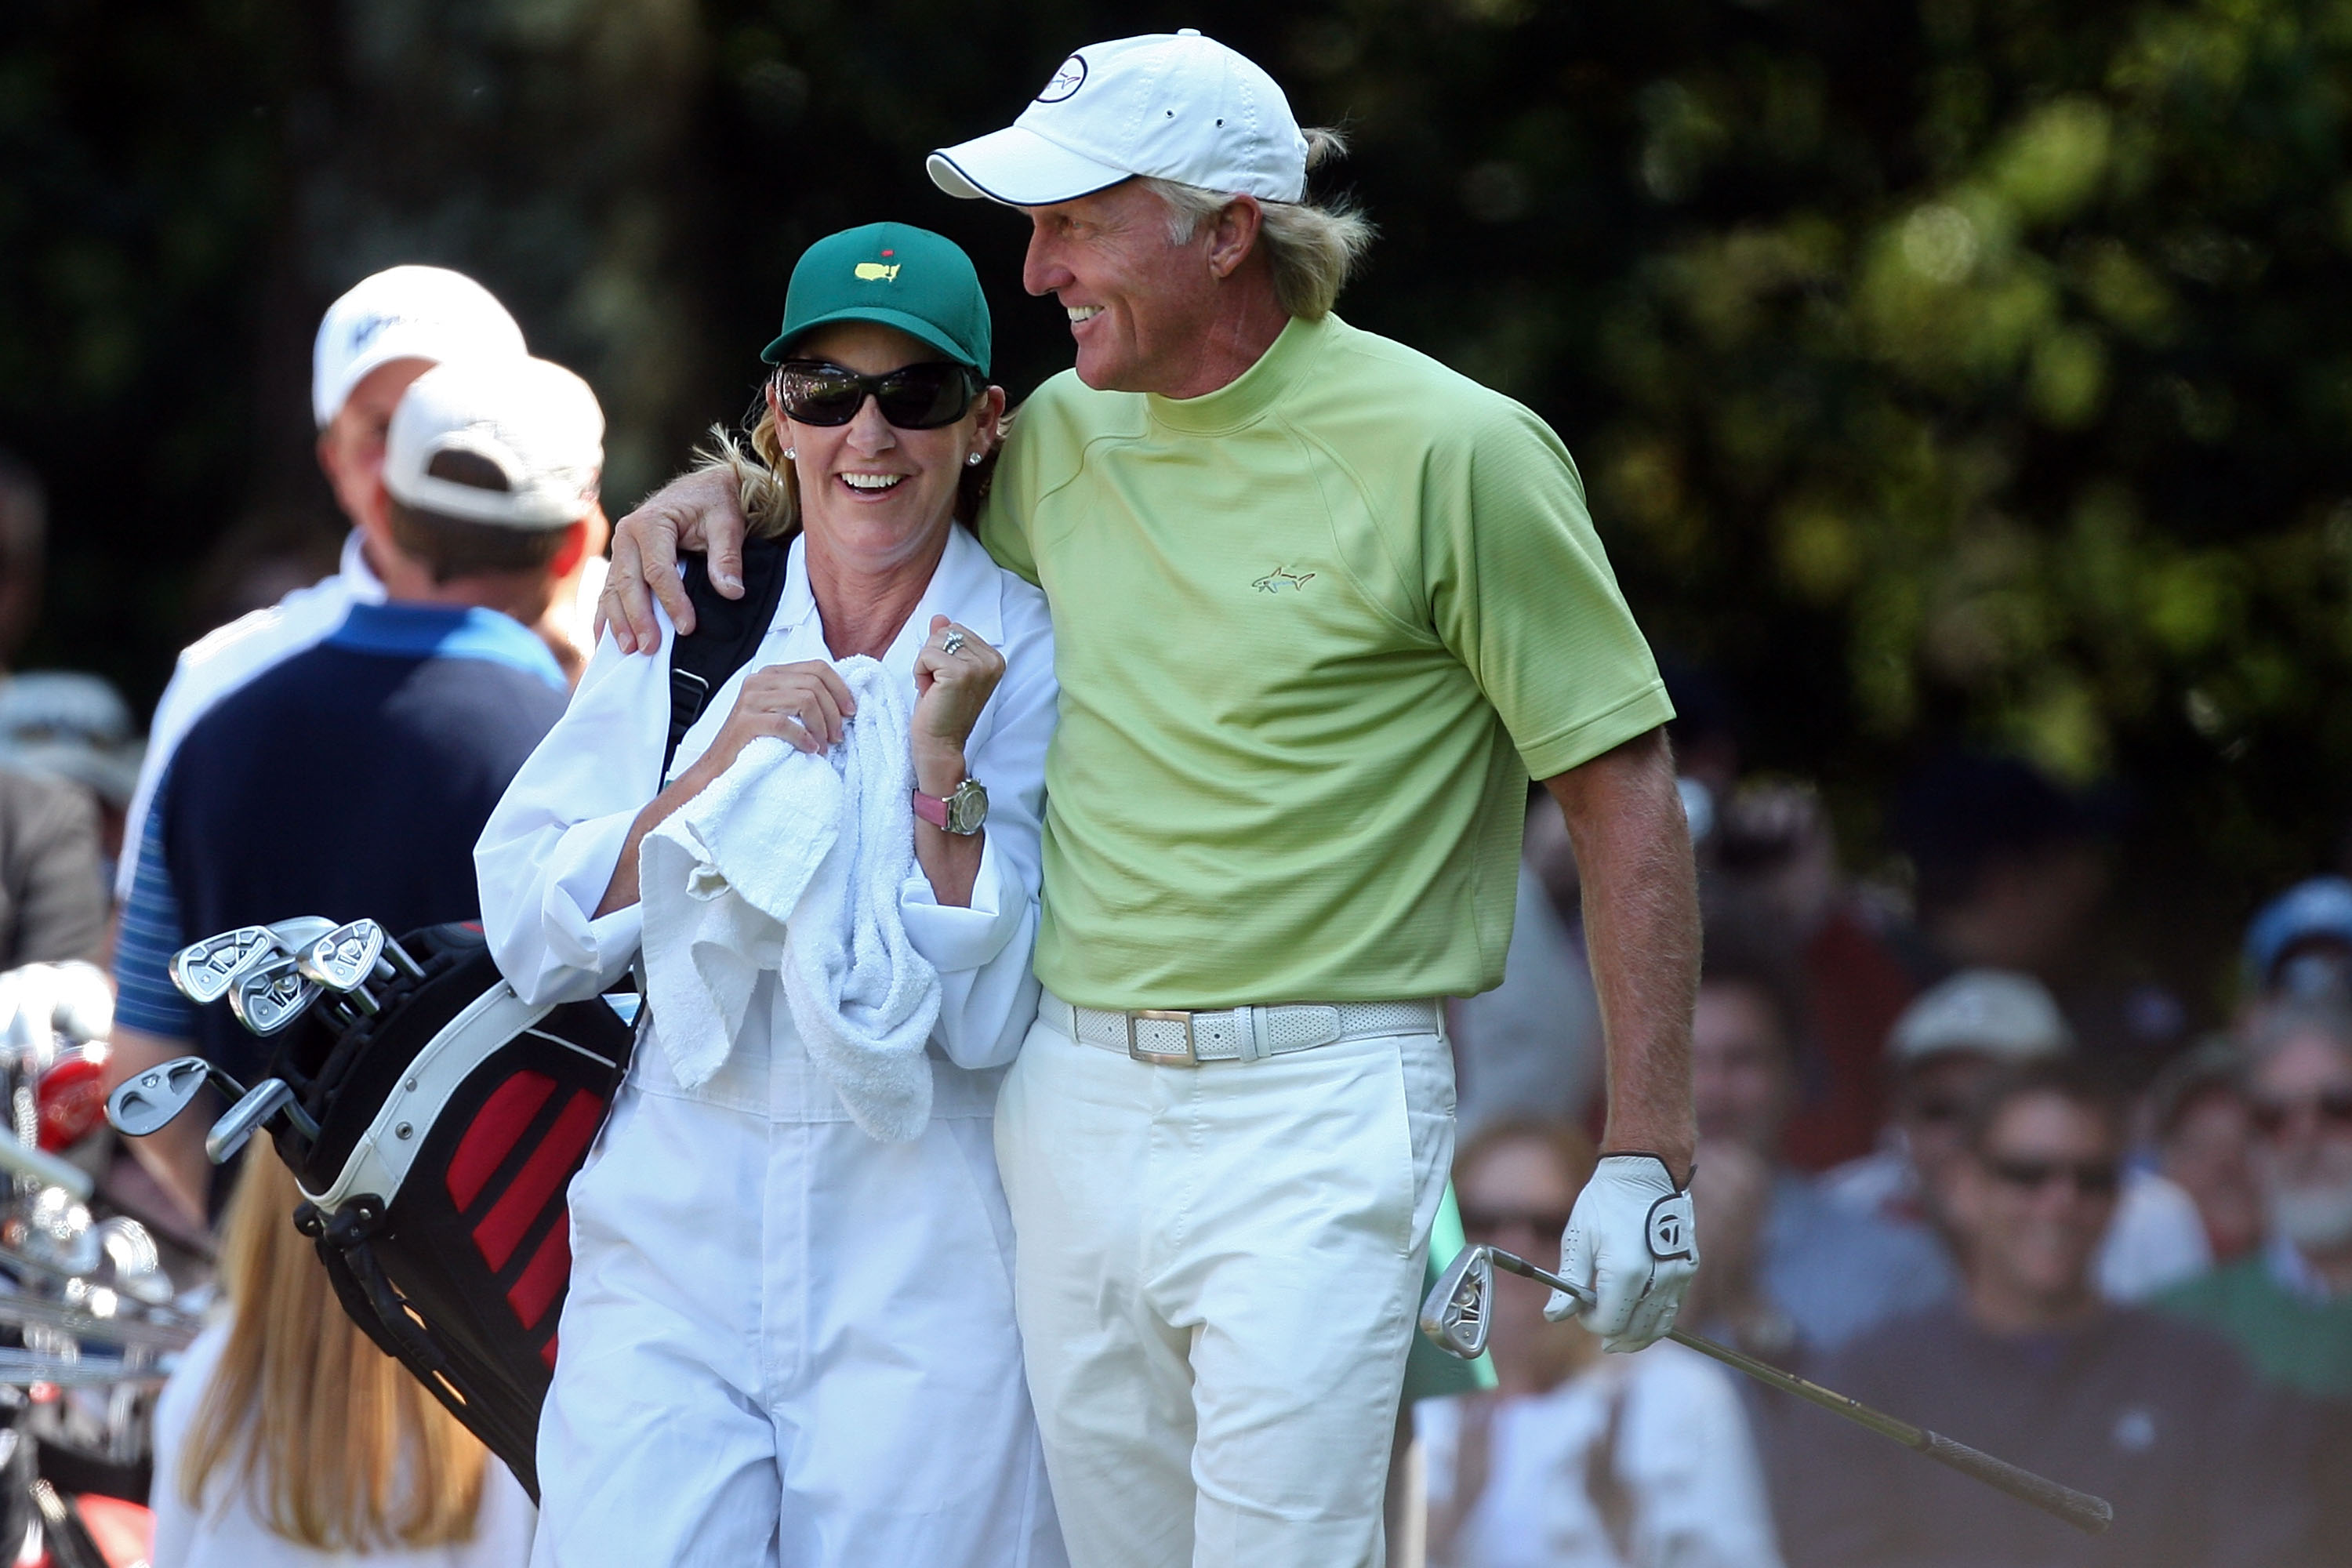 In her third marriage at the time, Chris Evert celebrates her then-husband Greg Norman's hole-in-one in 2009. 